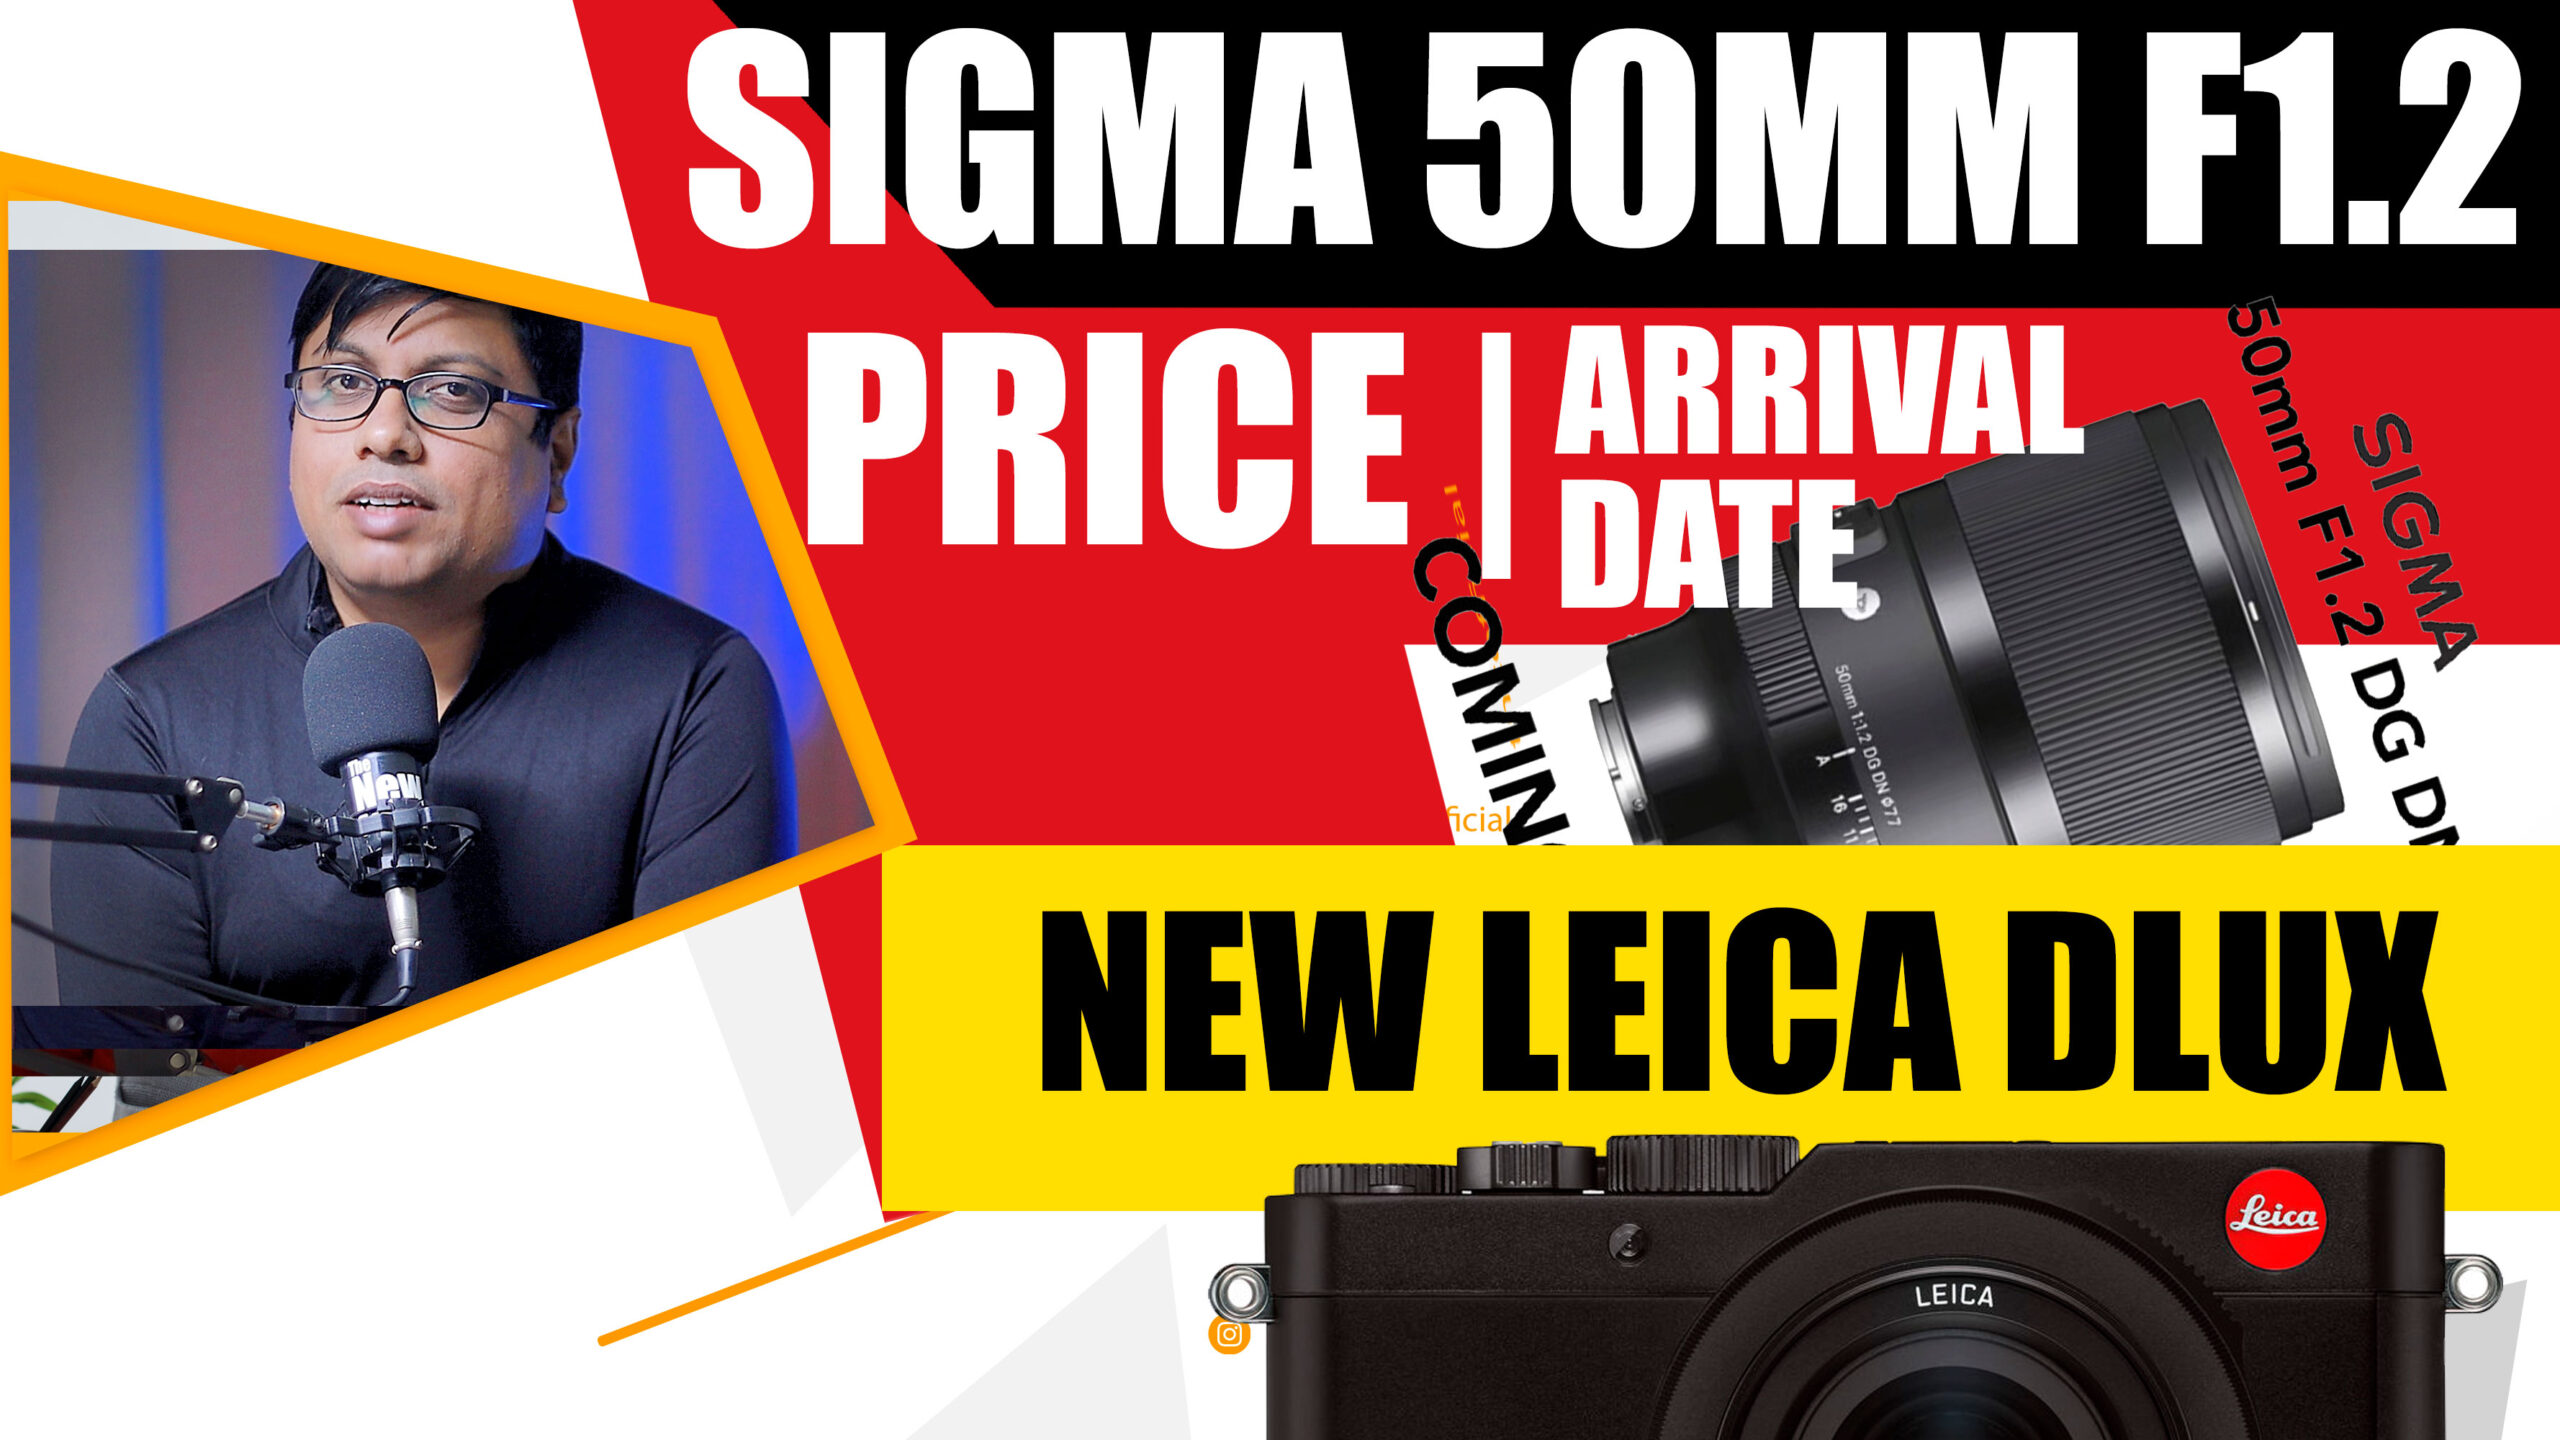 Sigma 50mm F1.2 Lens Arrival Date and Price